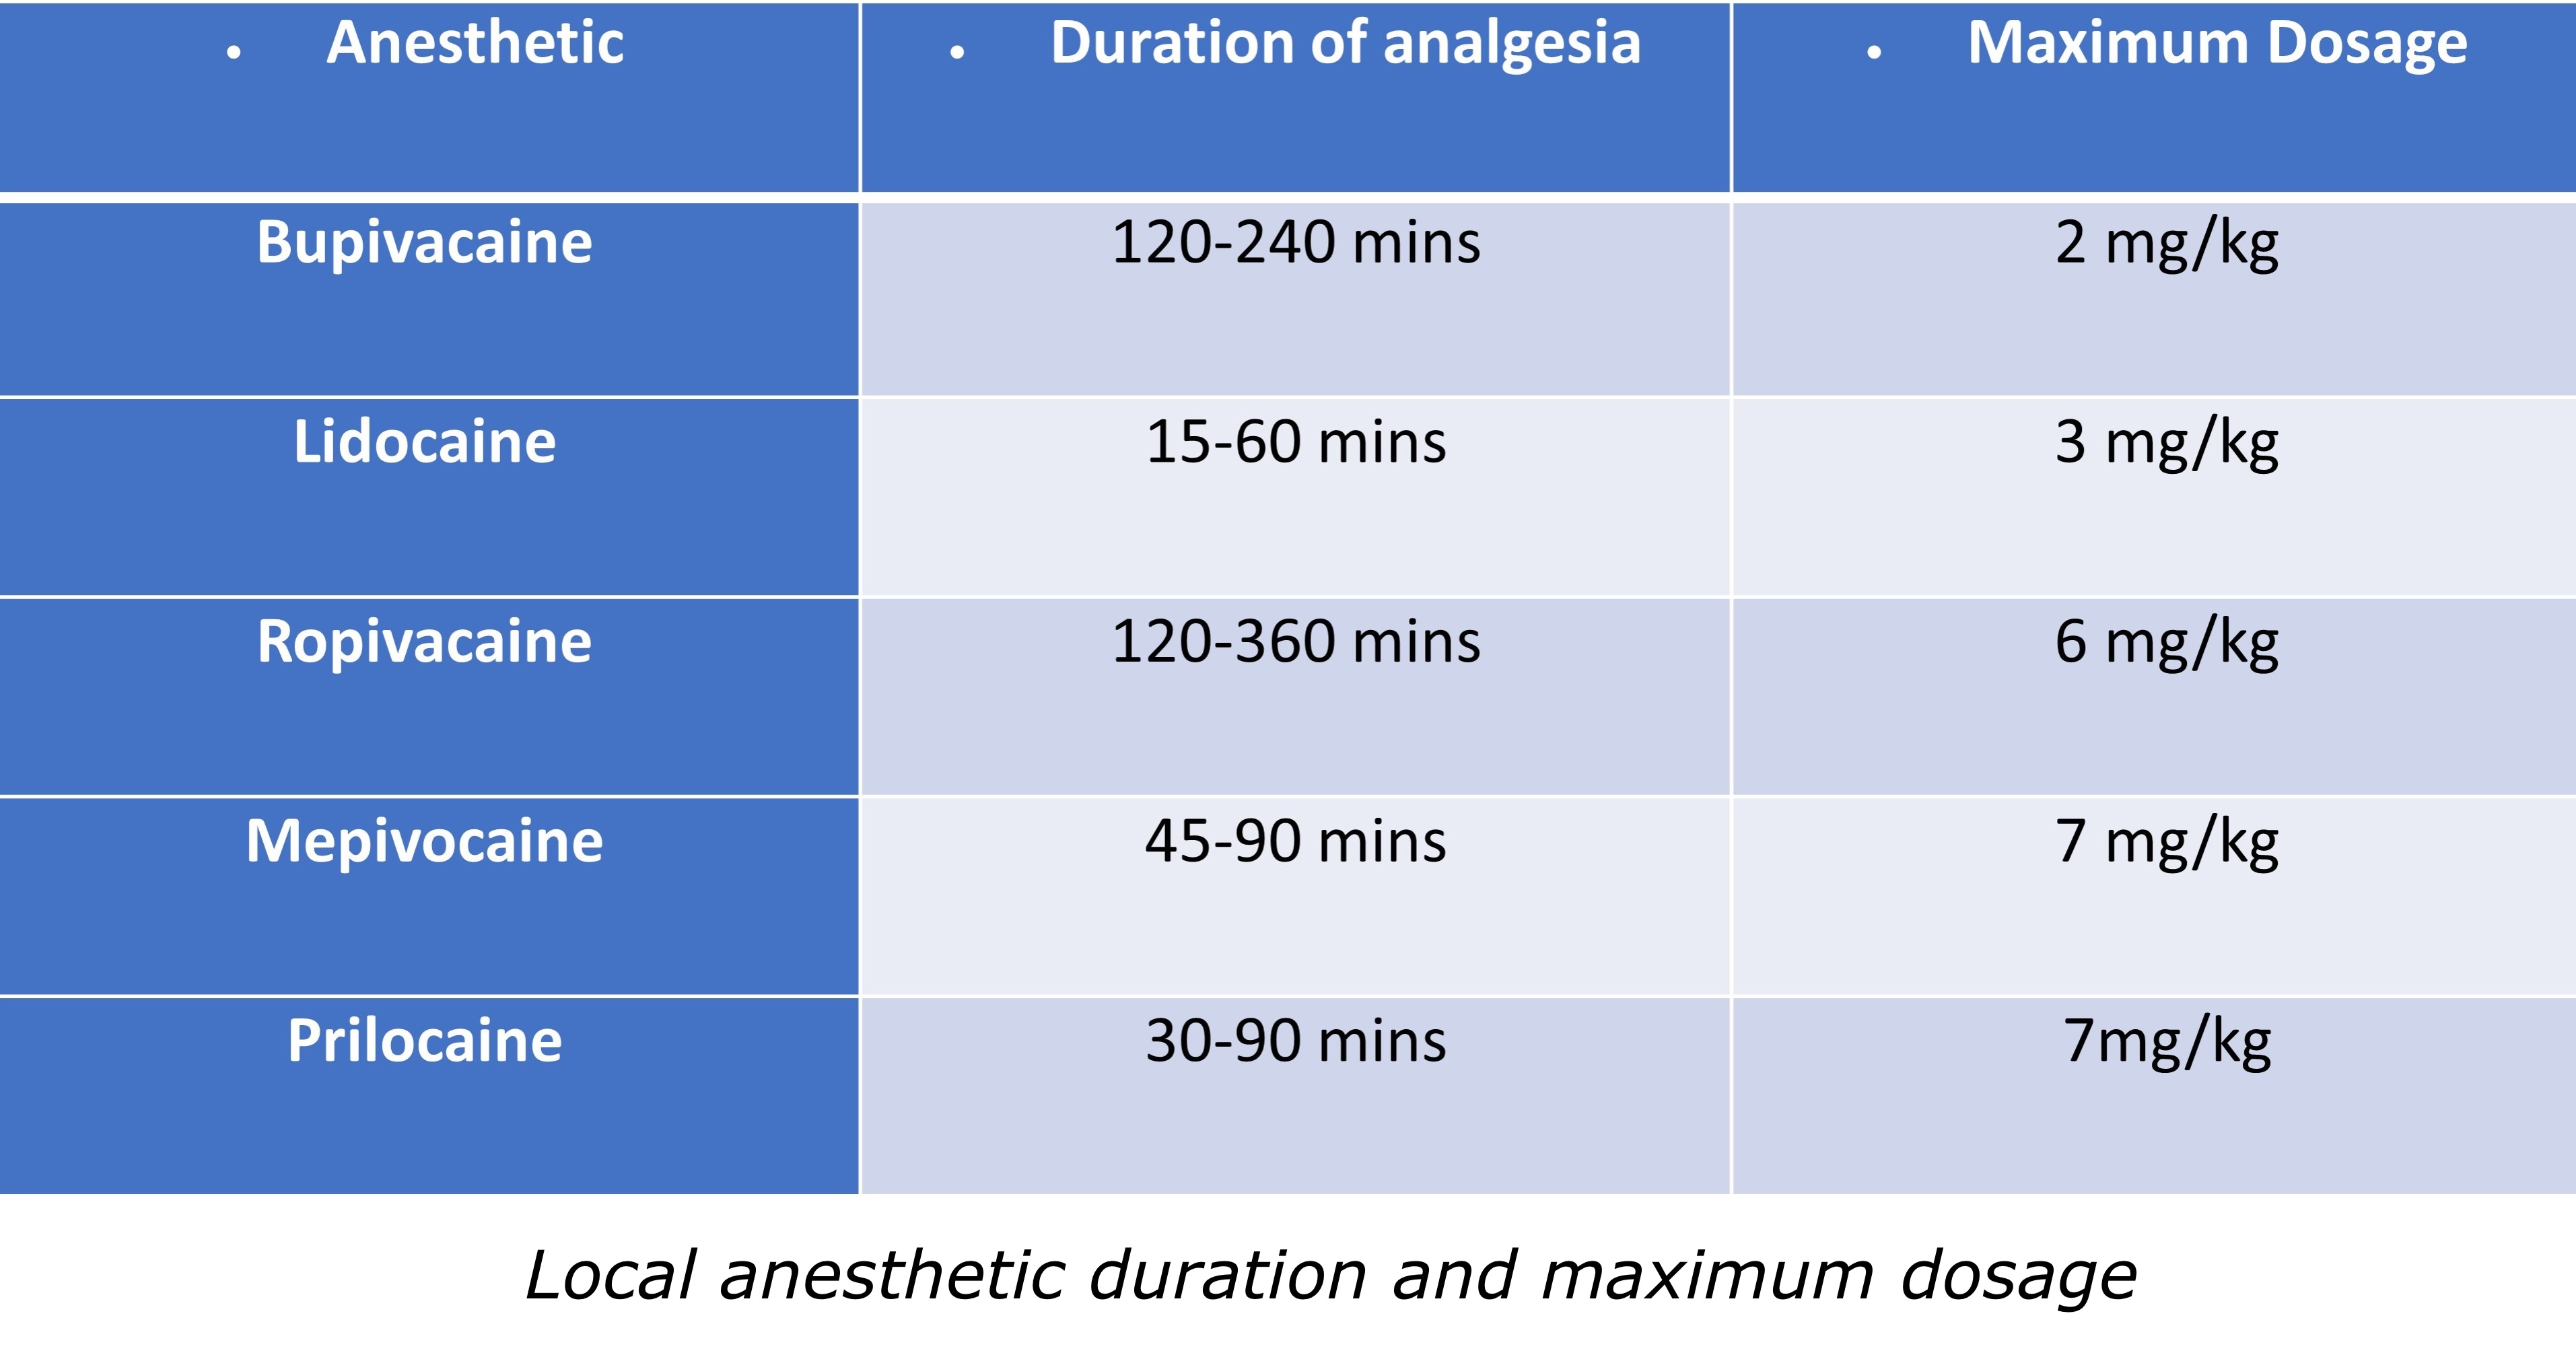 Local anesthetic duration and maximum dosage